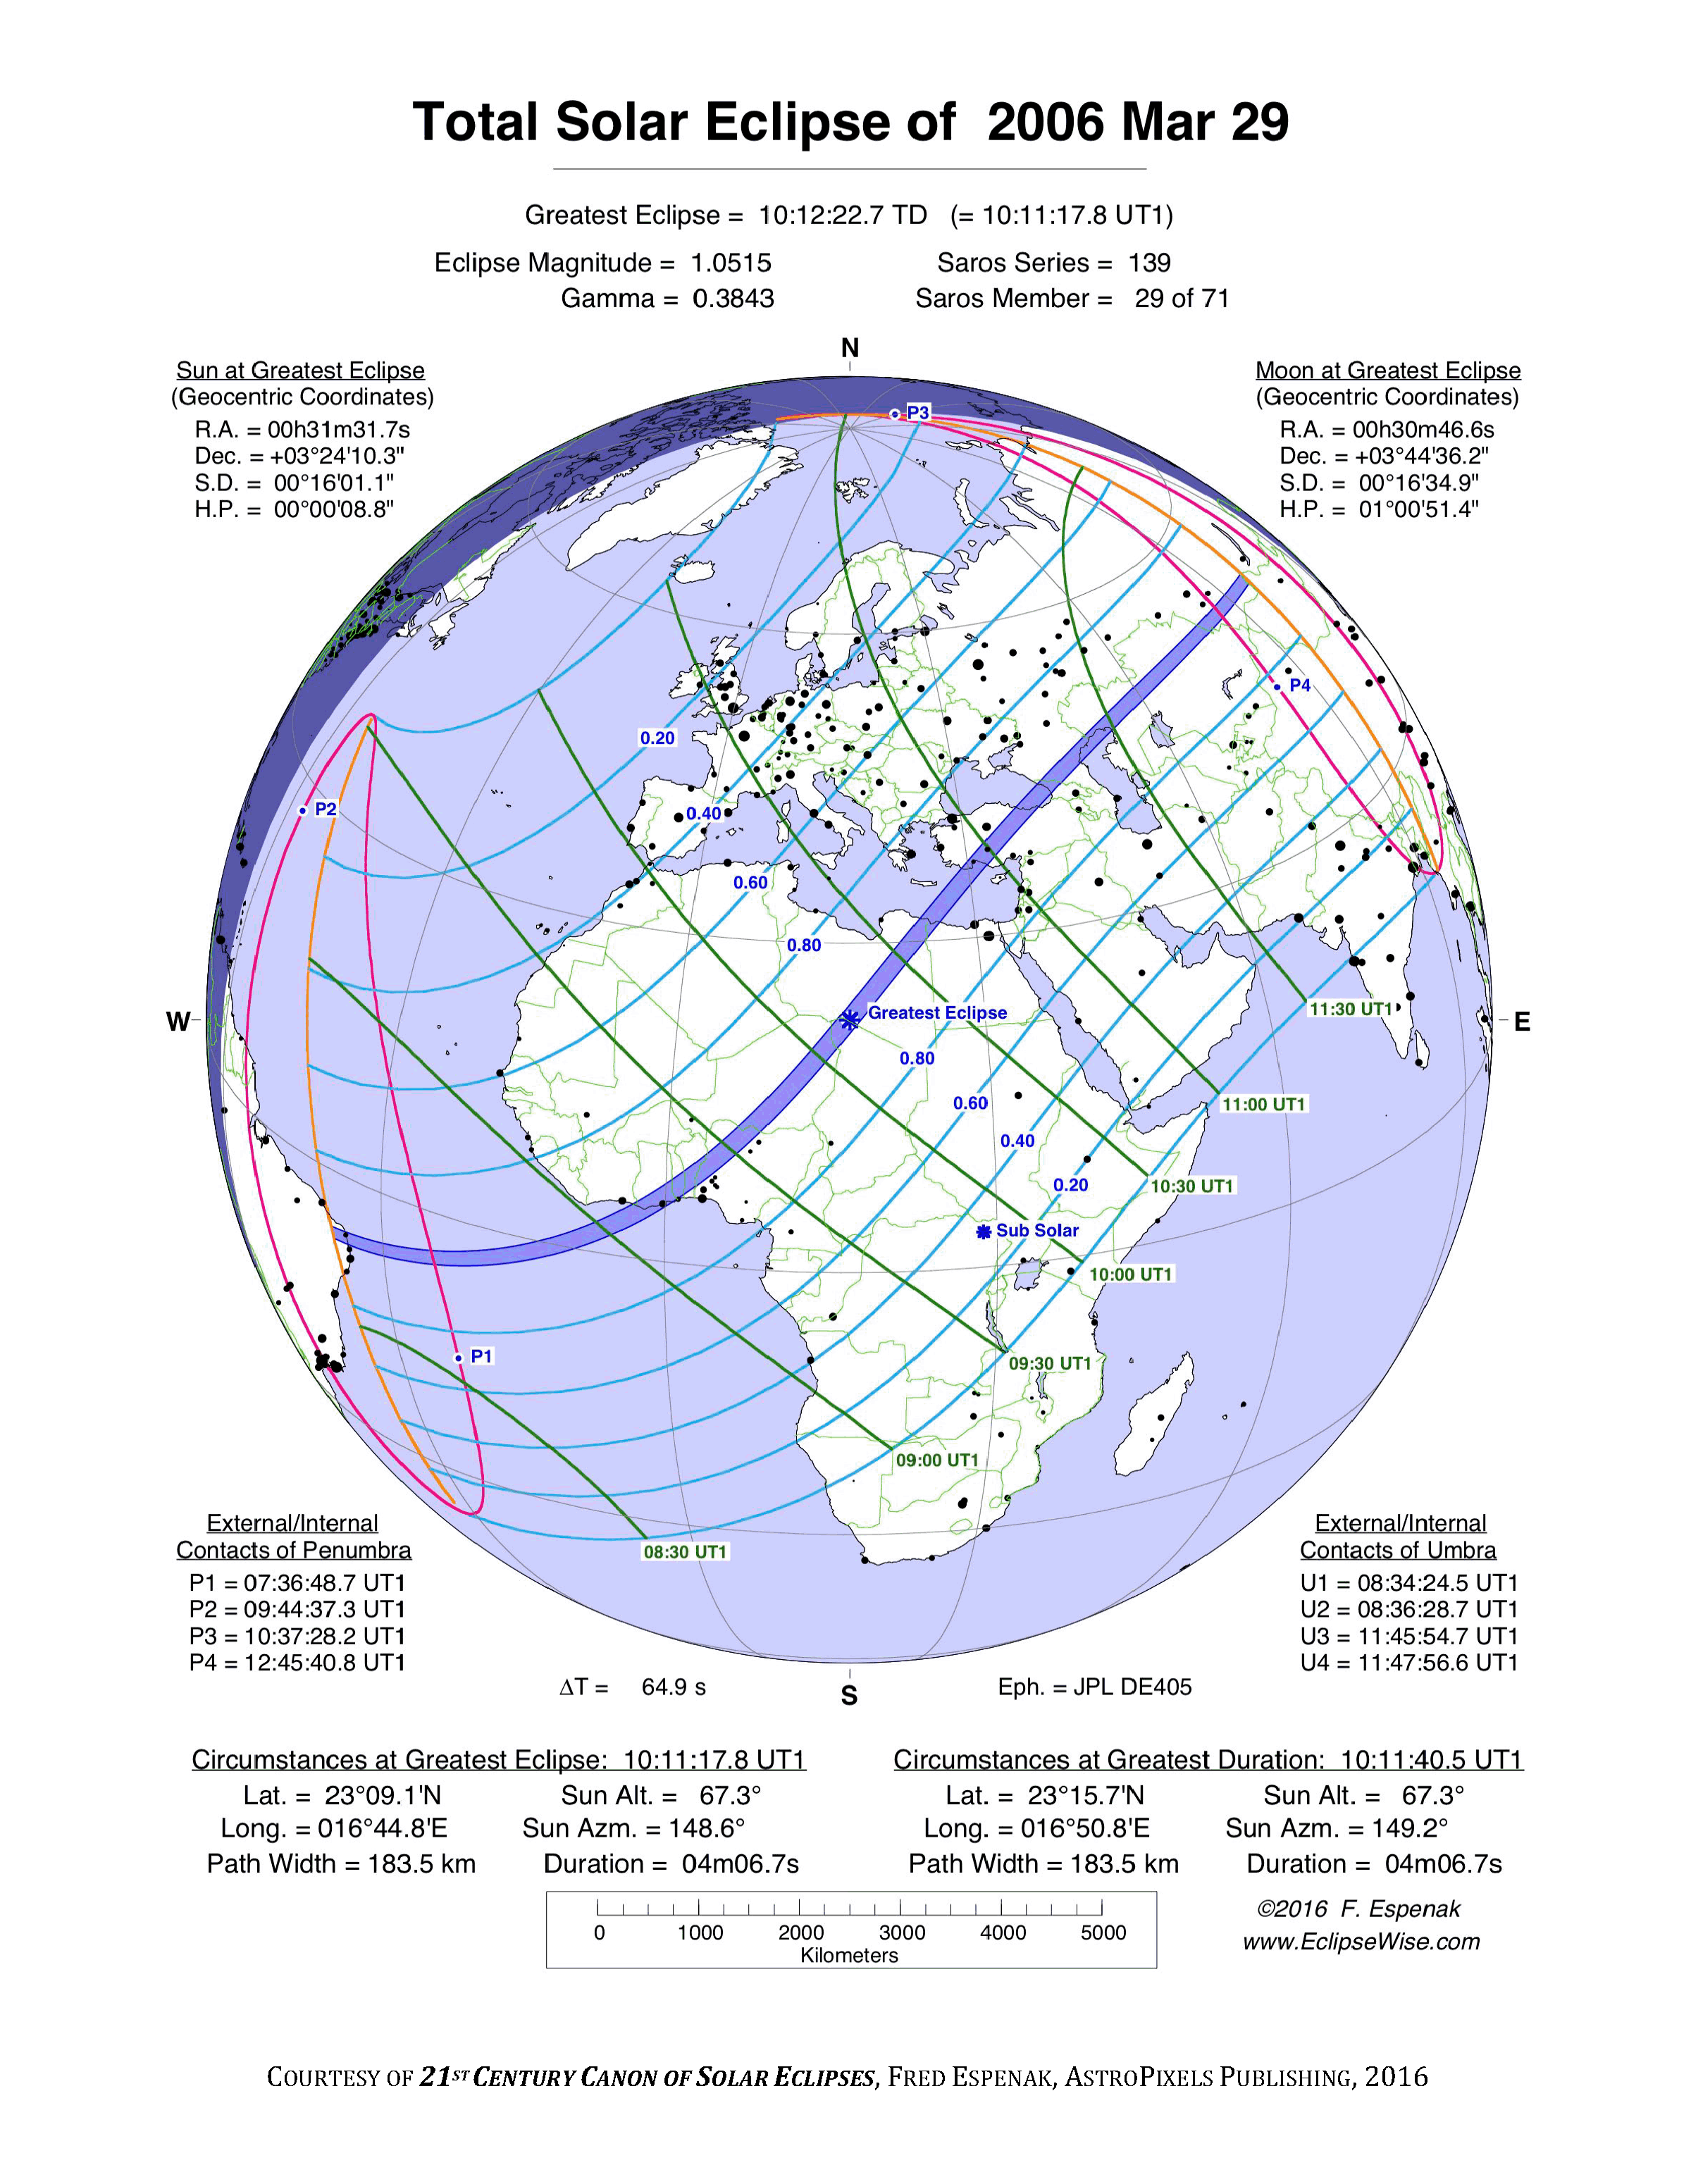 Total Solar Eclipse: March 29, 2006